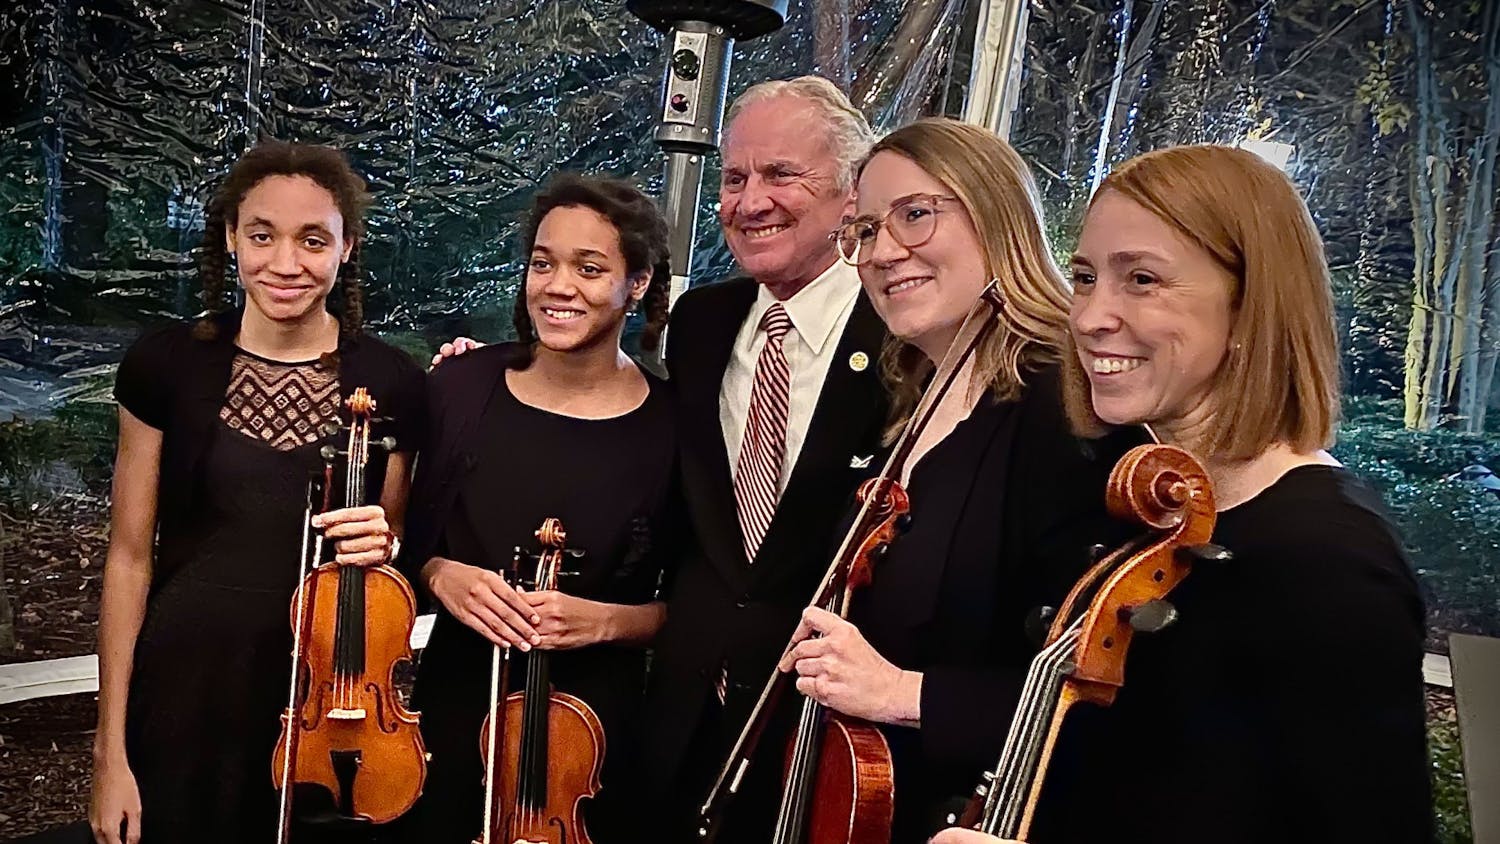 Two students at the Suzuki Academy of Columbia stand with Gov. Henry McMaster (center), violin instructor Kristen Harris (second from right) and academy director Sarah Evanovich (right) stand together at a SoundBites fundraising event in December 2021. SoundBites is a nonprofit based in South Carolina that is dedicated to providing high-quality instruments to those who cannot afford them.